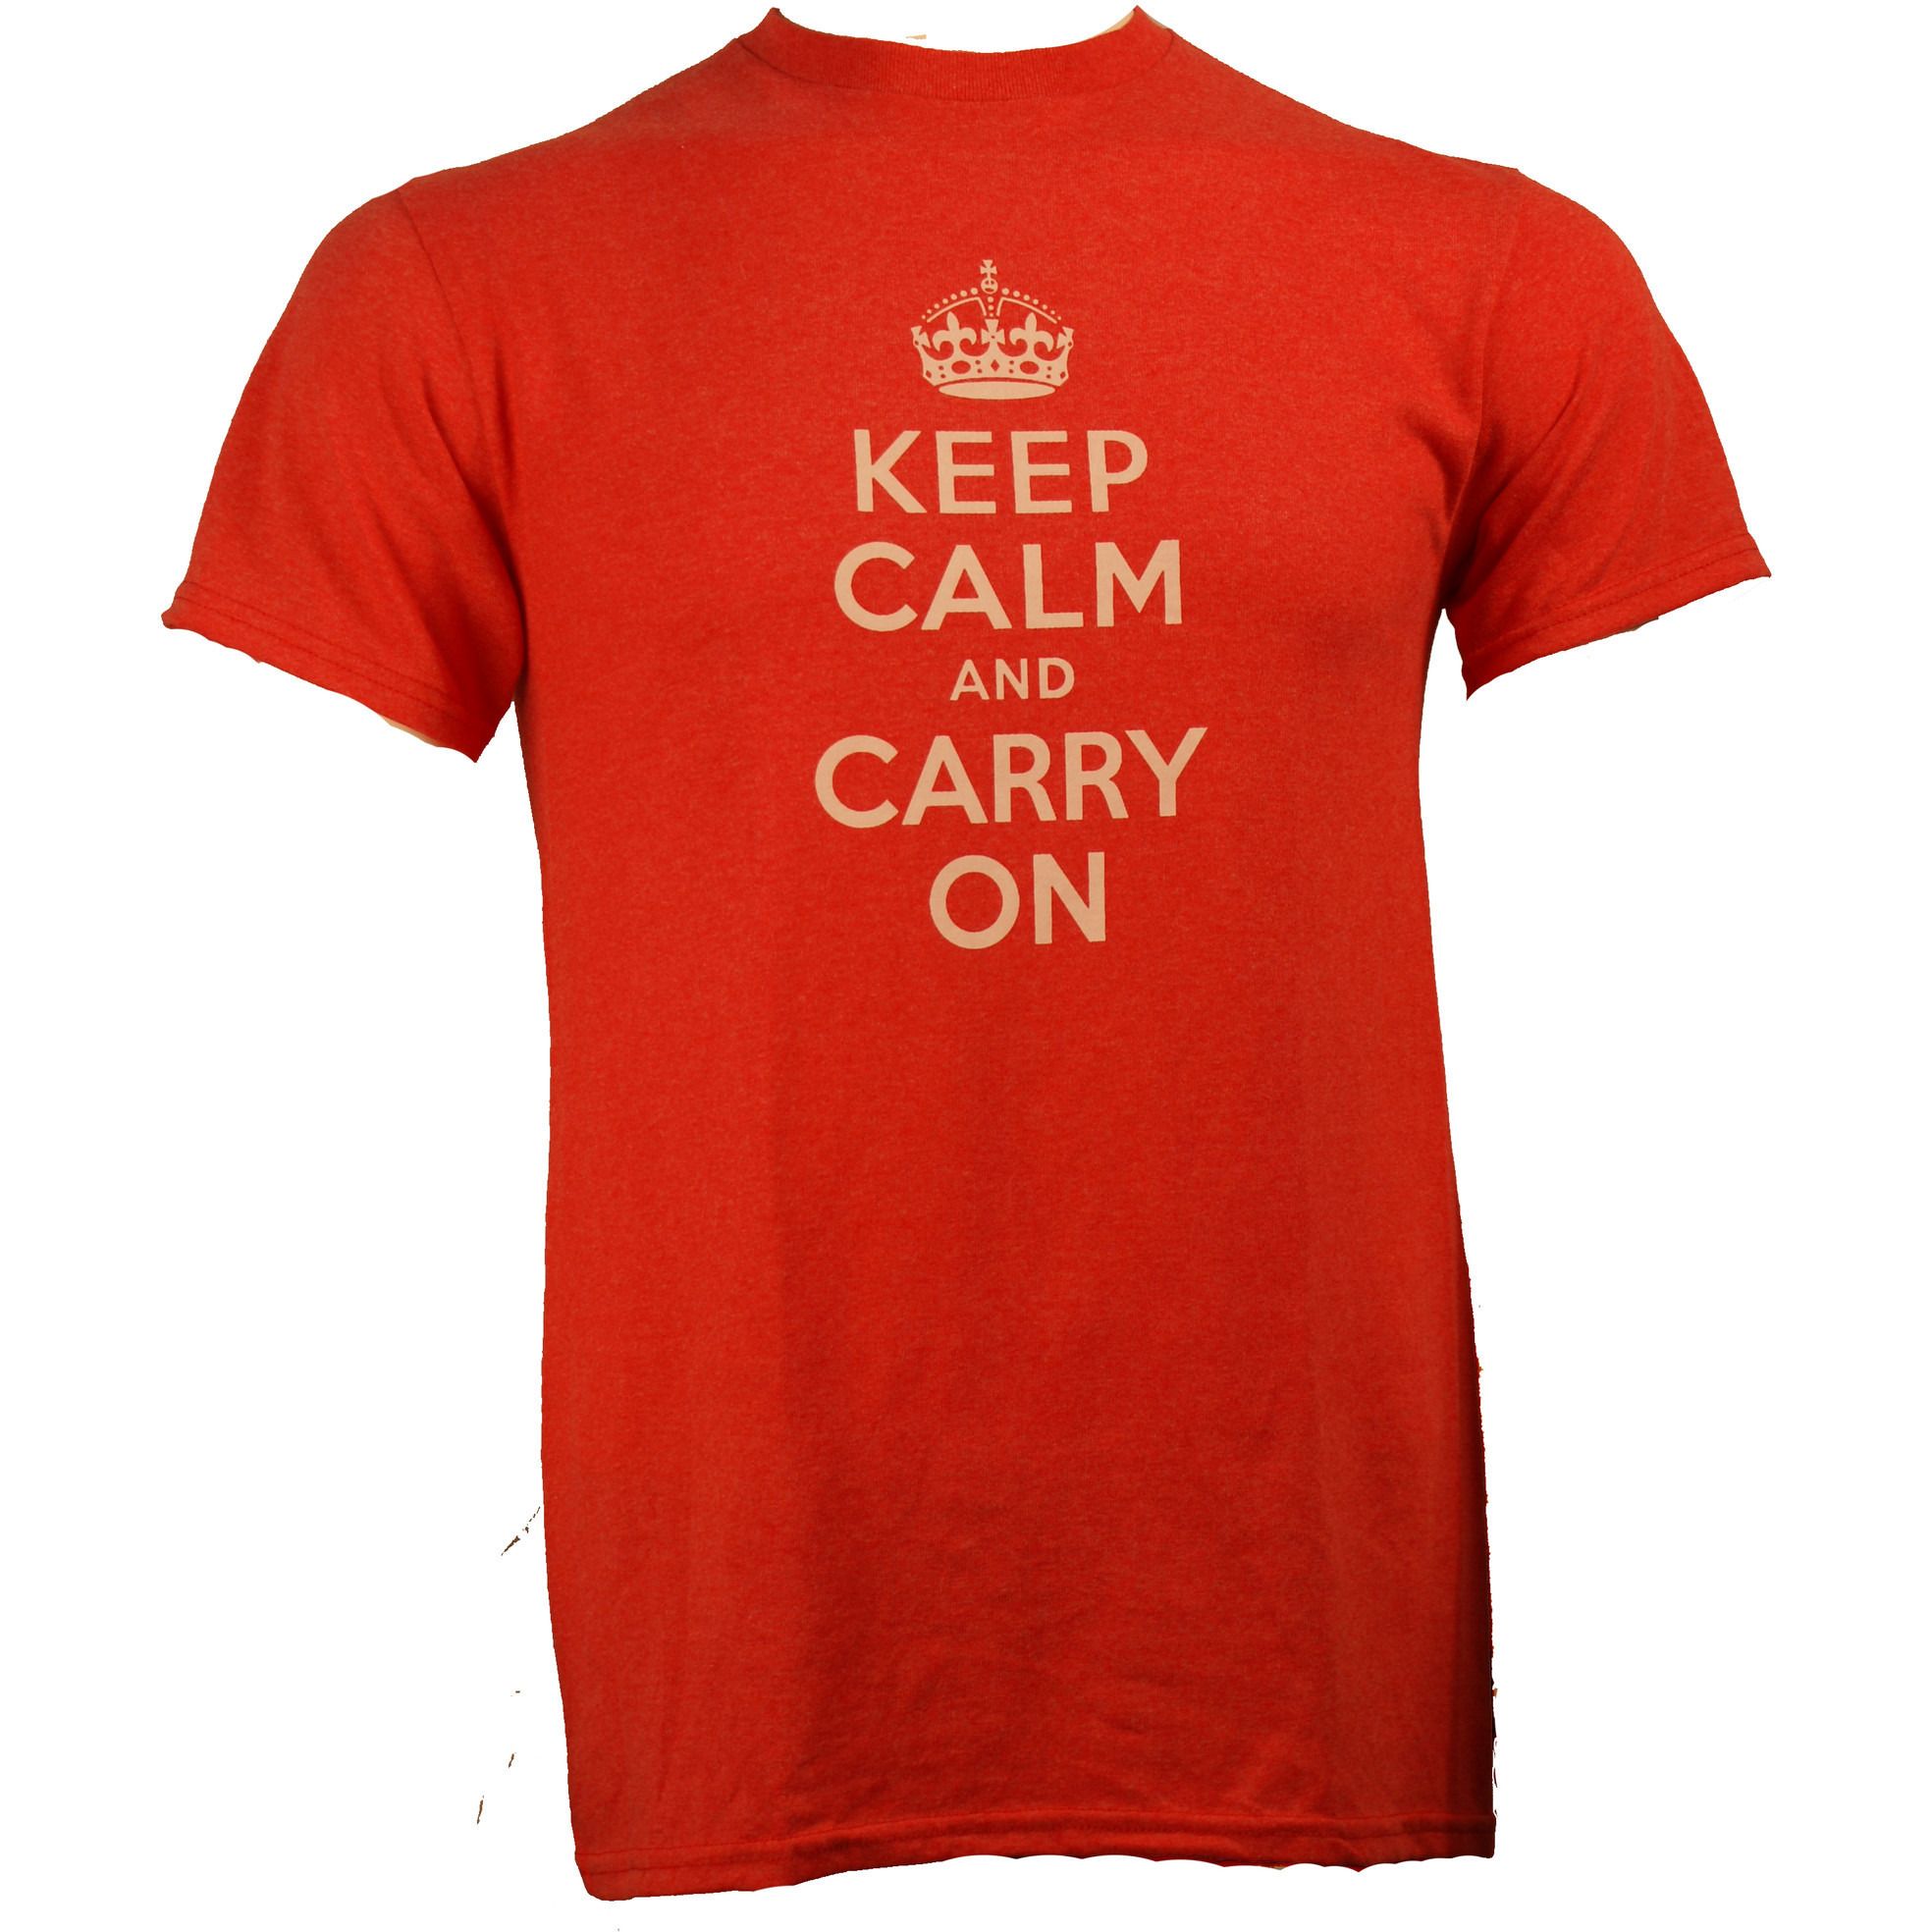  Keep Calm and Carry on Red Shirt Uncanny!